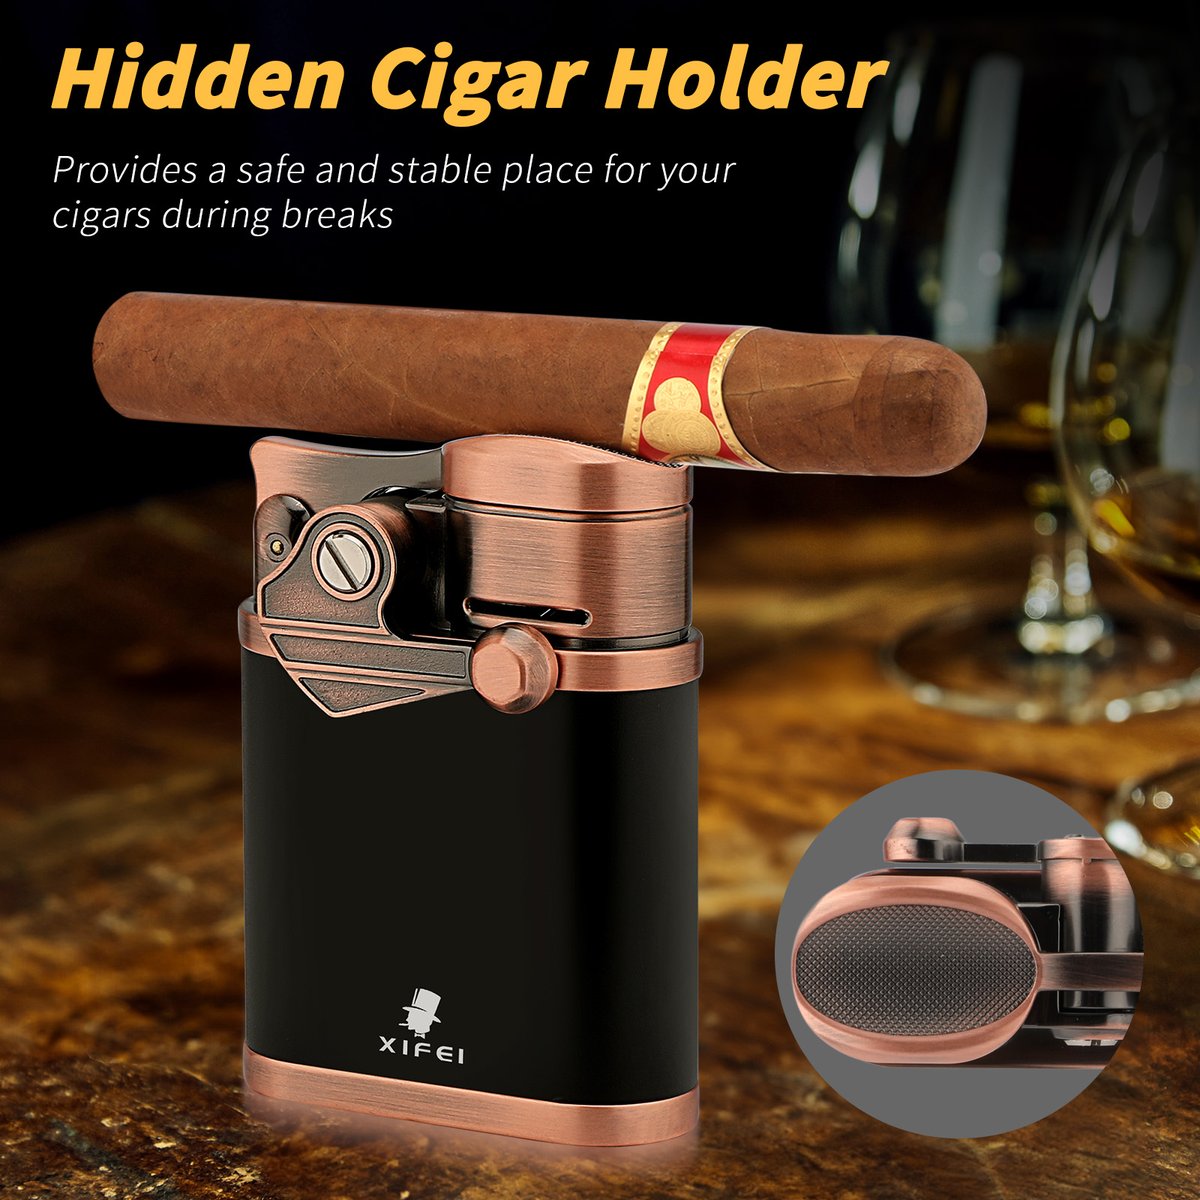 ★ New 4 Jet Flame Torch Lighter with Cigar Stand ★

☆ Special Vintage Rocker Lighter ☆
.
.
#cigarlighter #cigaraccessories #xifeicigaraccessory #cigars #cigarsociety #cigarsmoker #cigarlifestyle #cigarlovers #cigarlounge #cigarshop #smokingcigars  #wholesale #retail